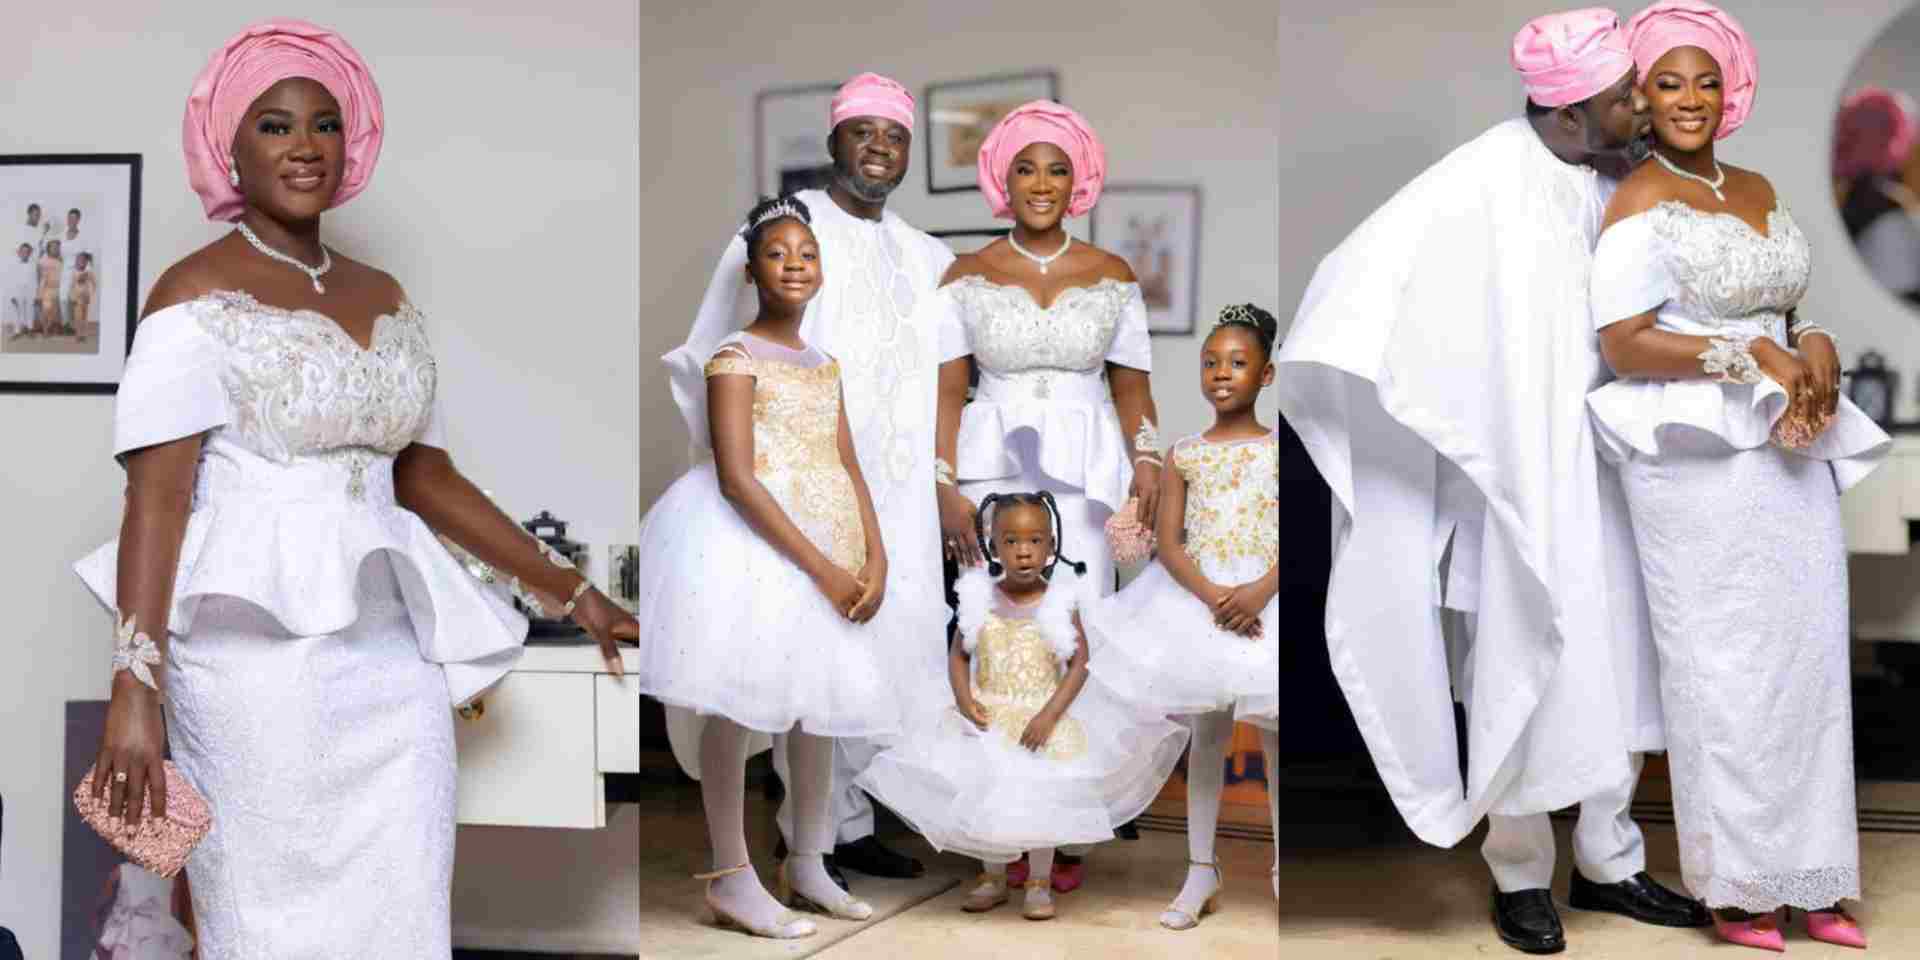 Mercy Johnson-Okojie rolls out cute family photos days after being dragged into amorous mess